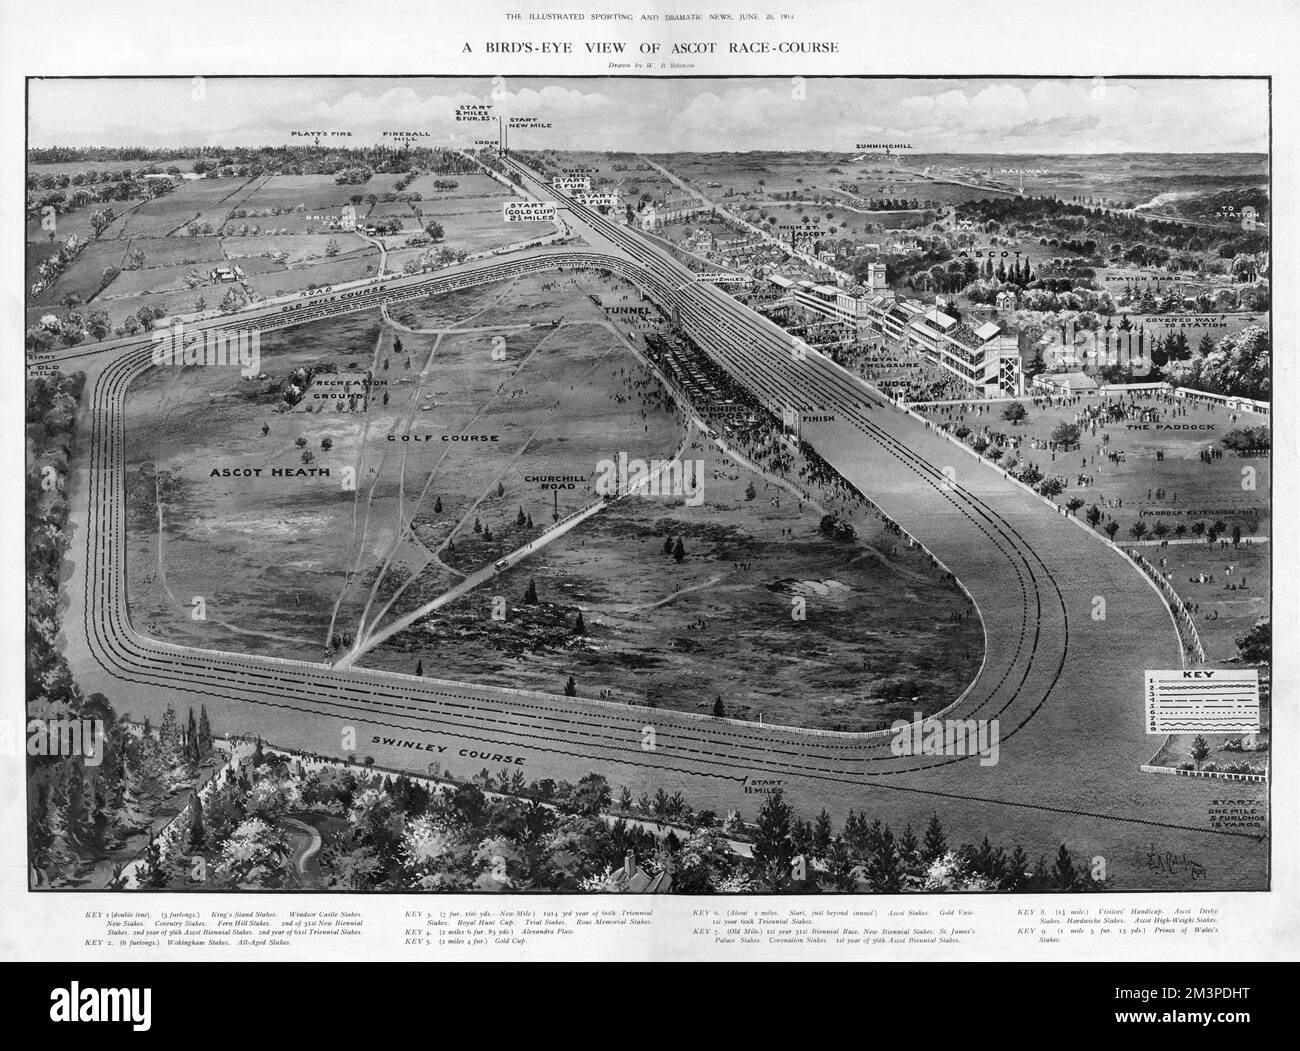 A Bird's eye view of Ascot Racecourse in 1914 von W. B. Robinson in den Illustrated Sporting and Dramatical News Datum: 1914 Stockfoto